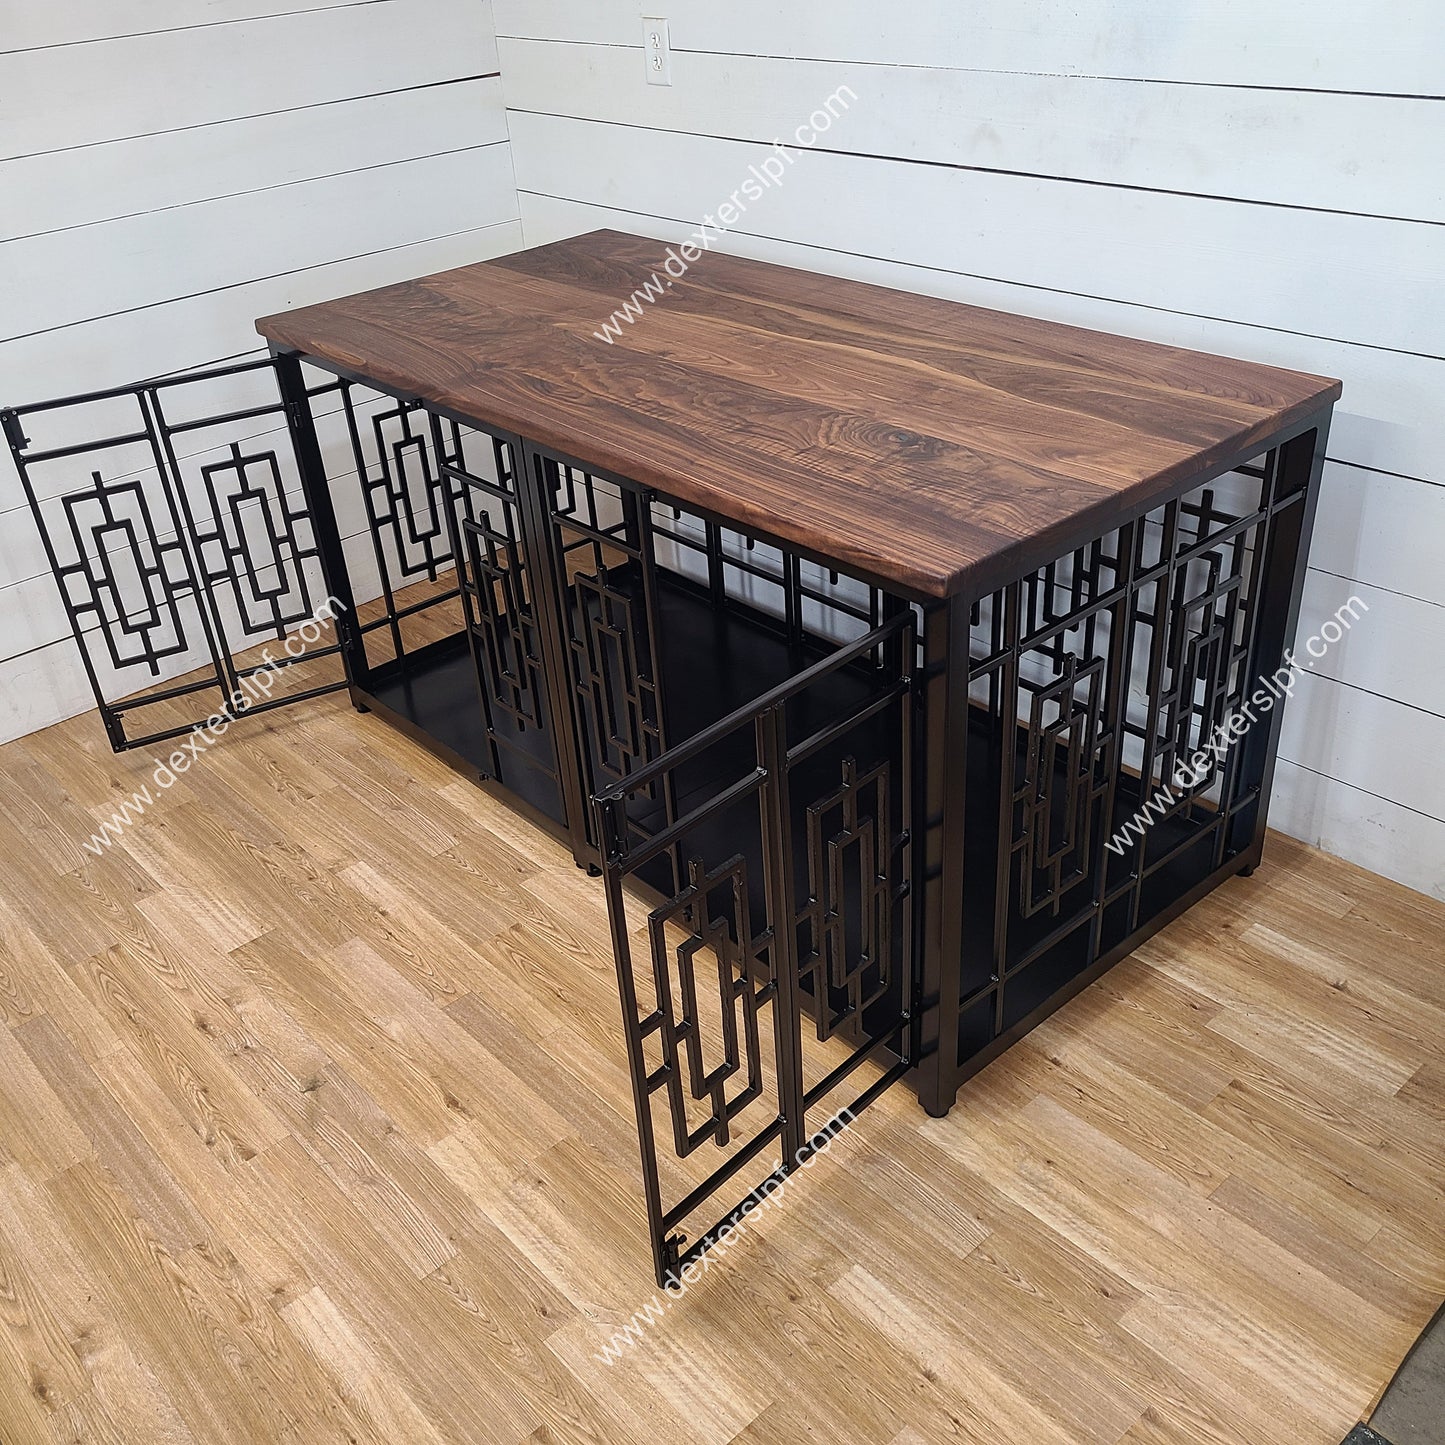 Daisy Large Double Dog Crate Furniture, Dog Kennel Furniture, Double Dog Crate, Dog Crate, Custom Dog Crate Furniture